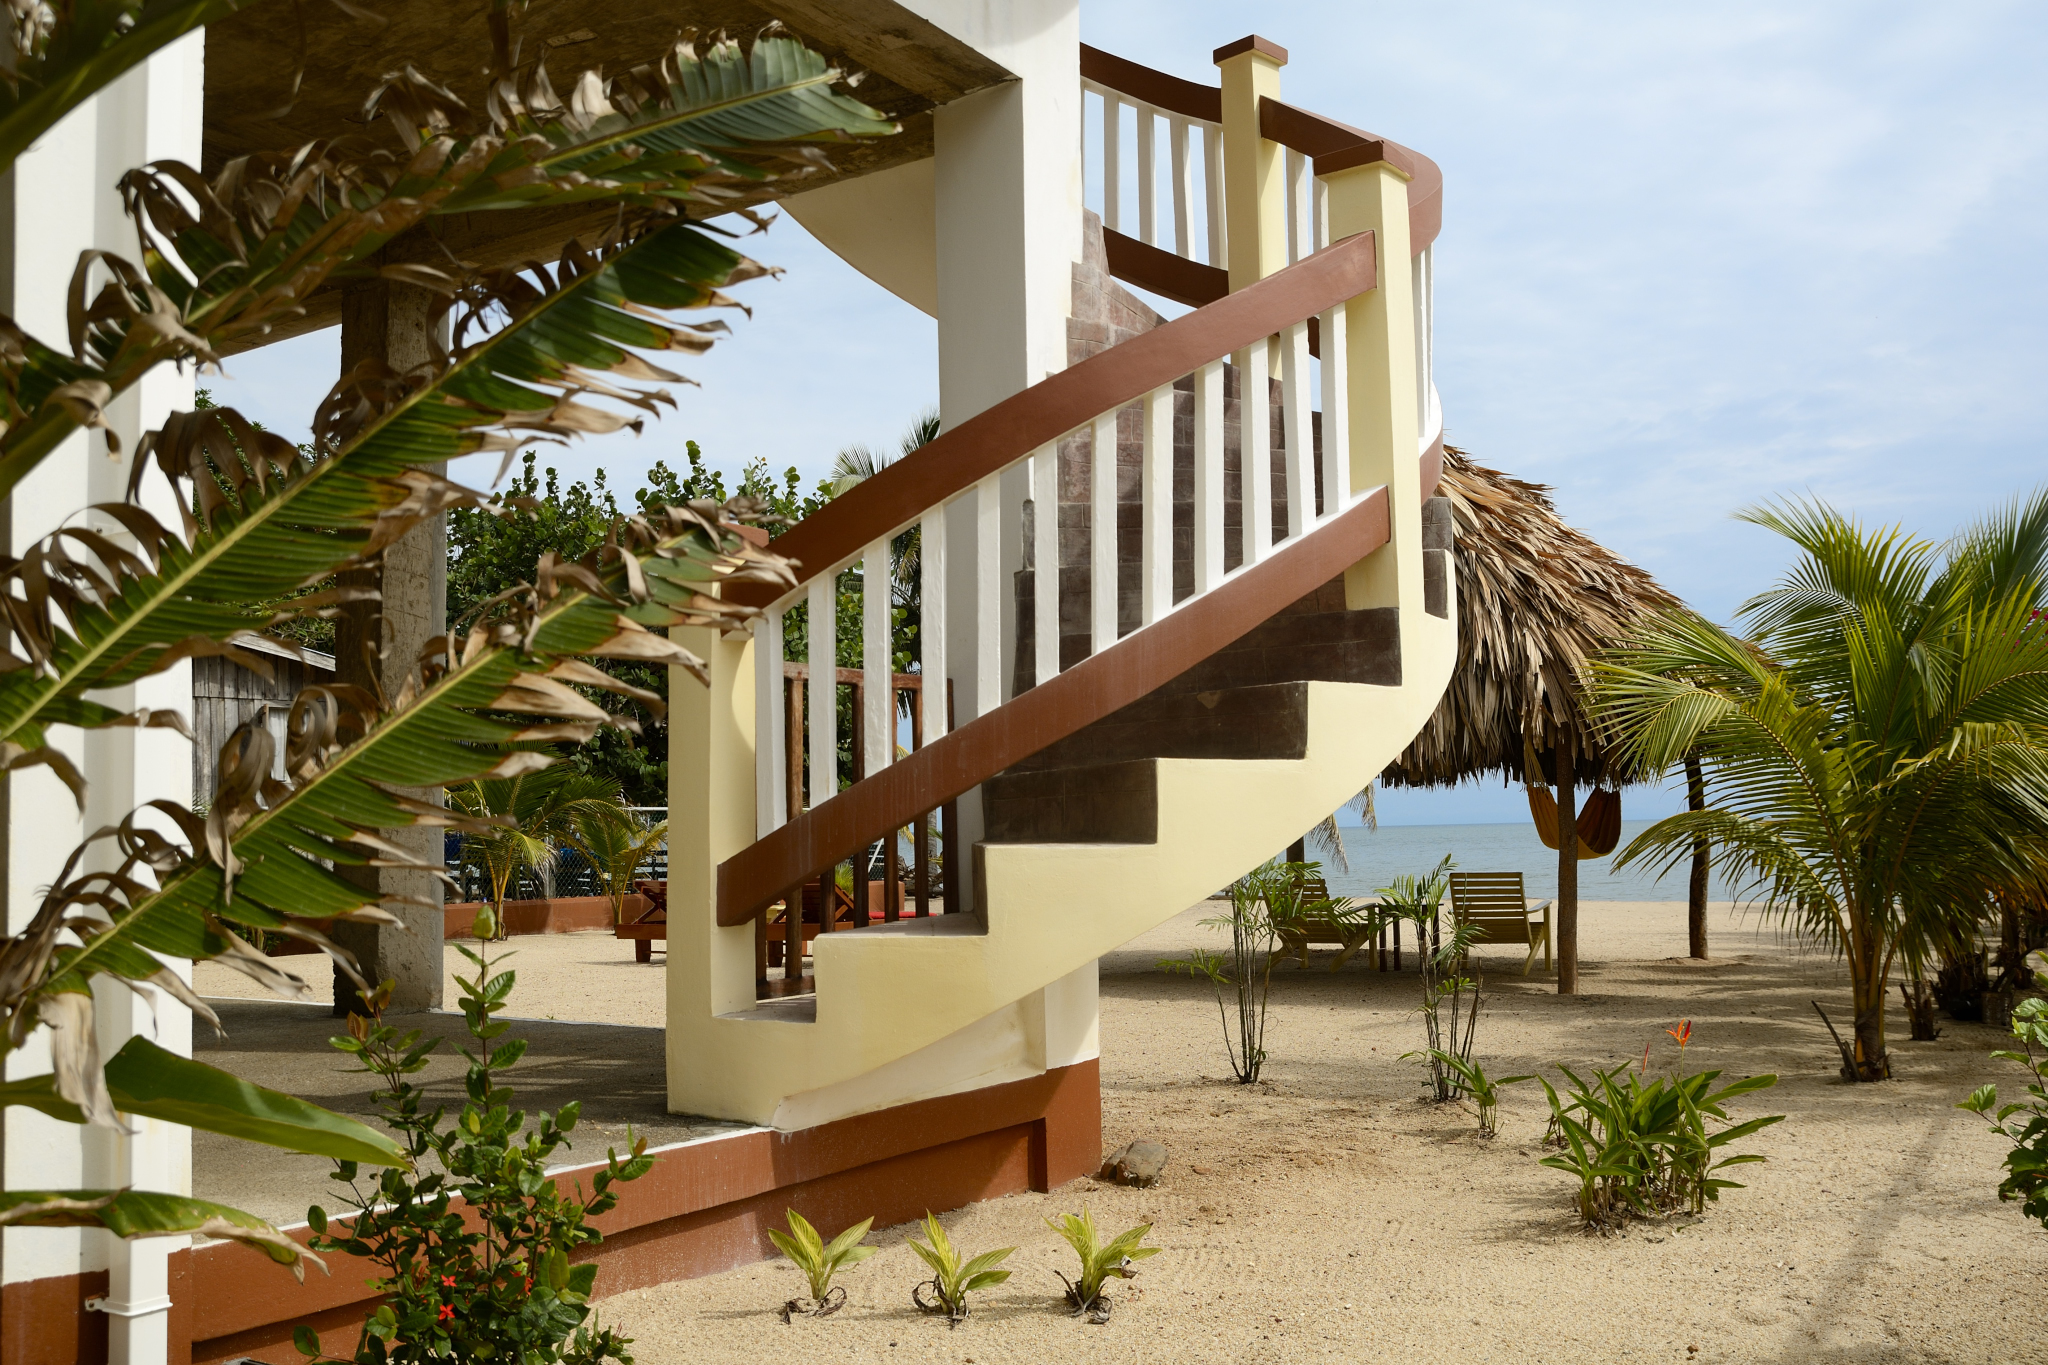 Circular Staircase up to Roof and down to the Beach